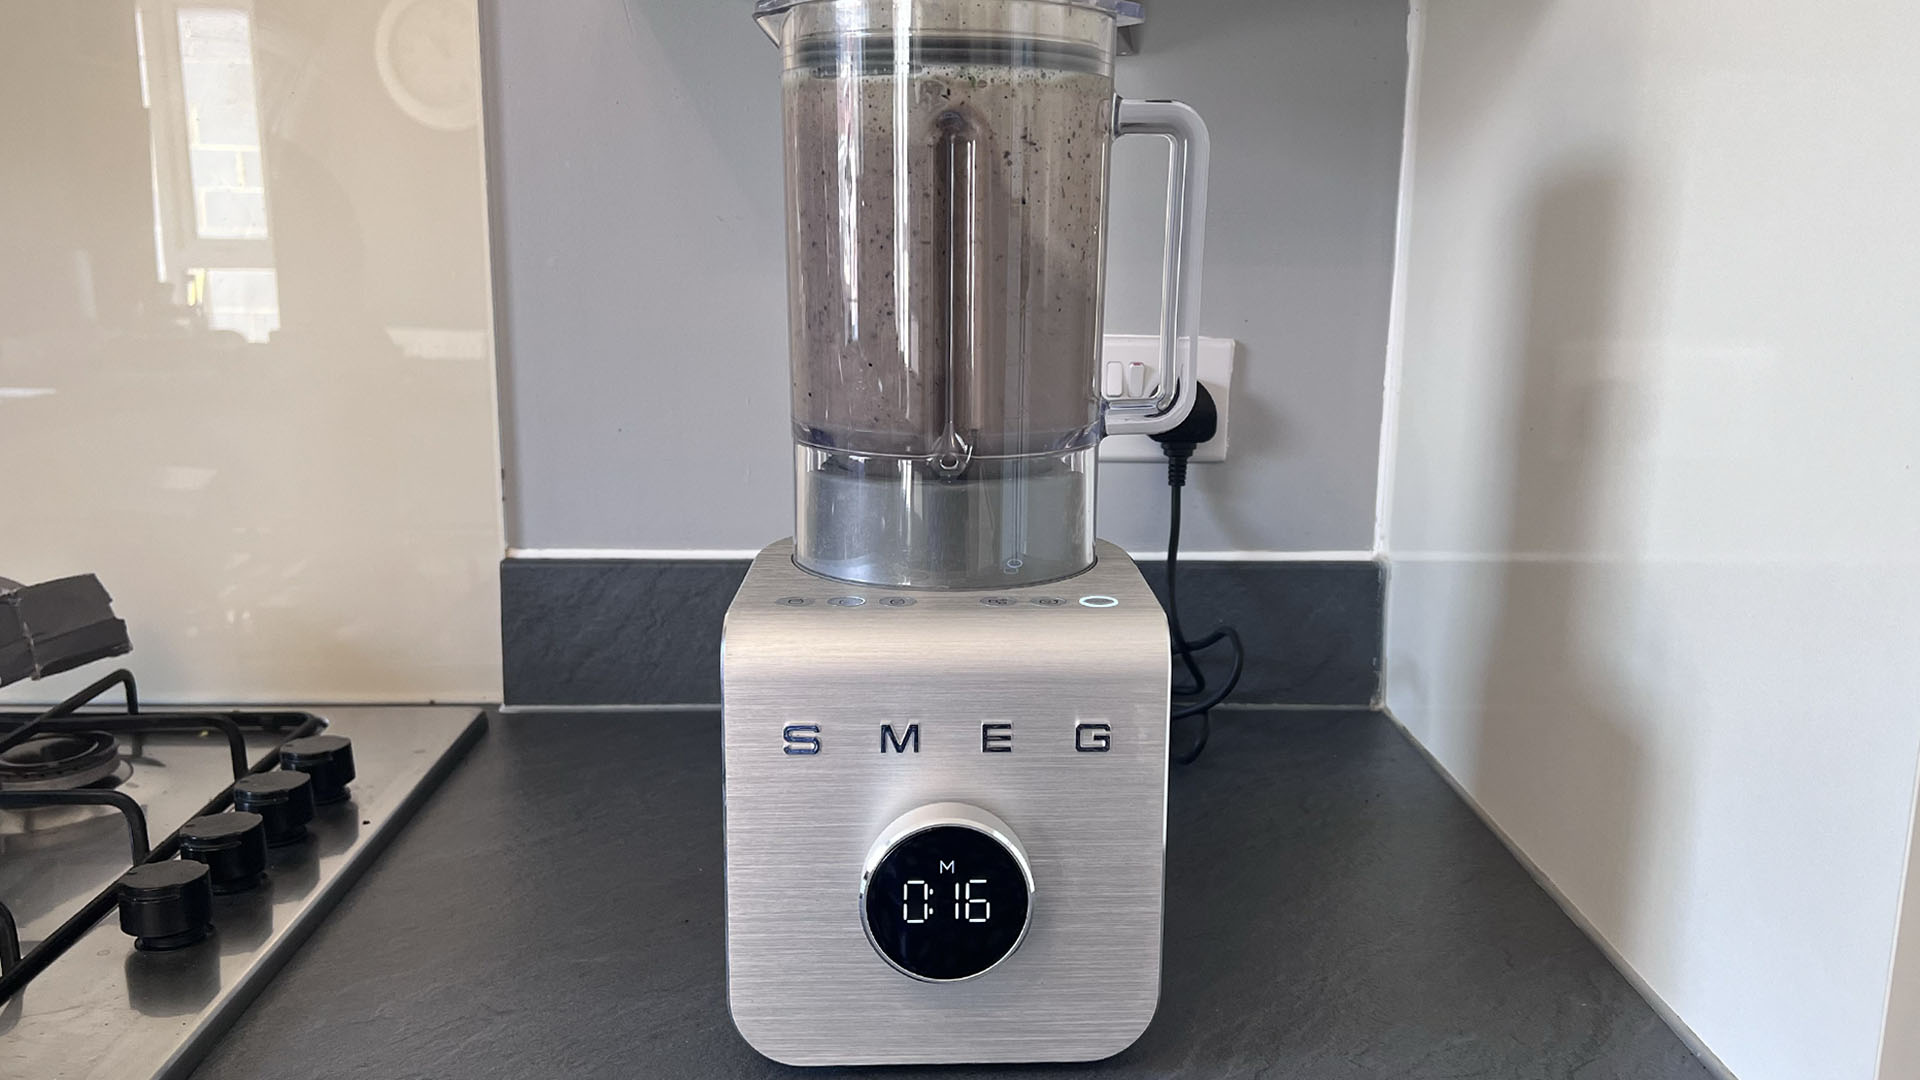 Making a kale, blueberry and banana smoothie in the Smeg BLC01 Professional Blender